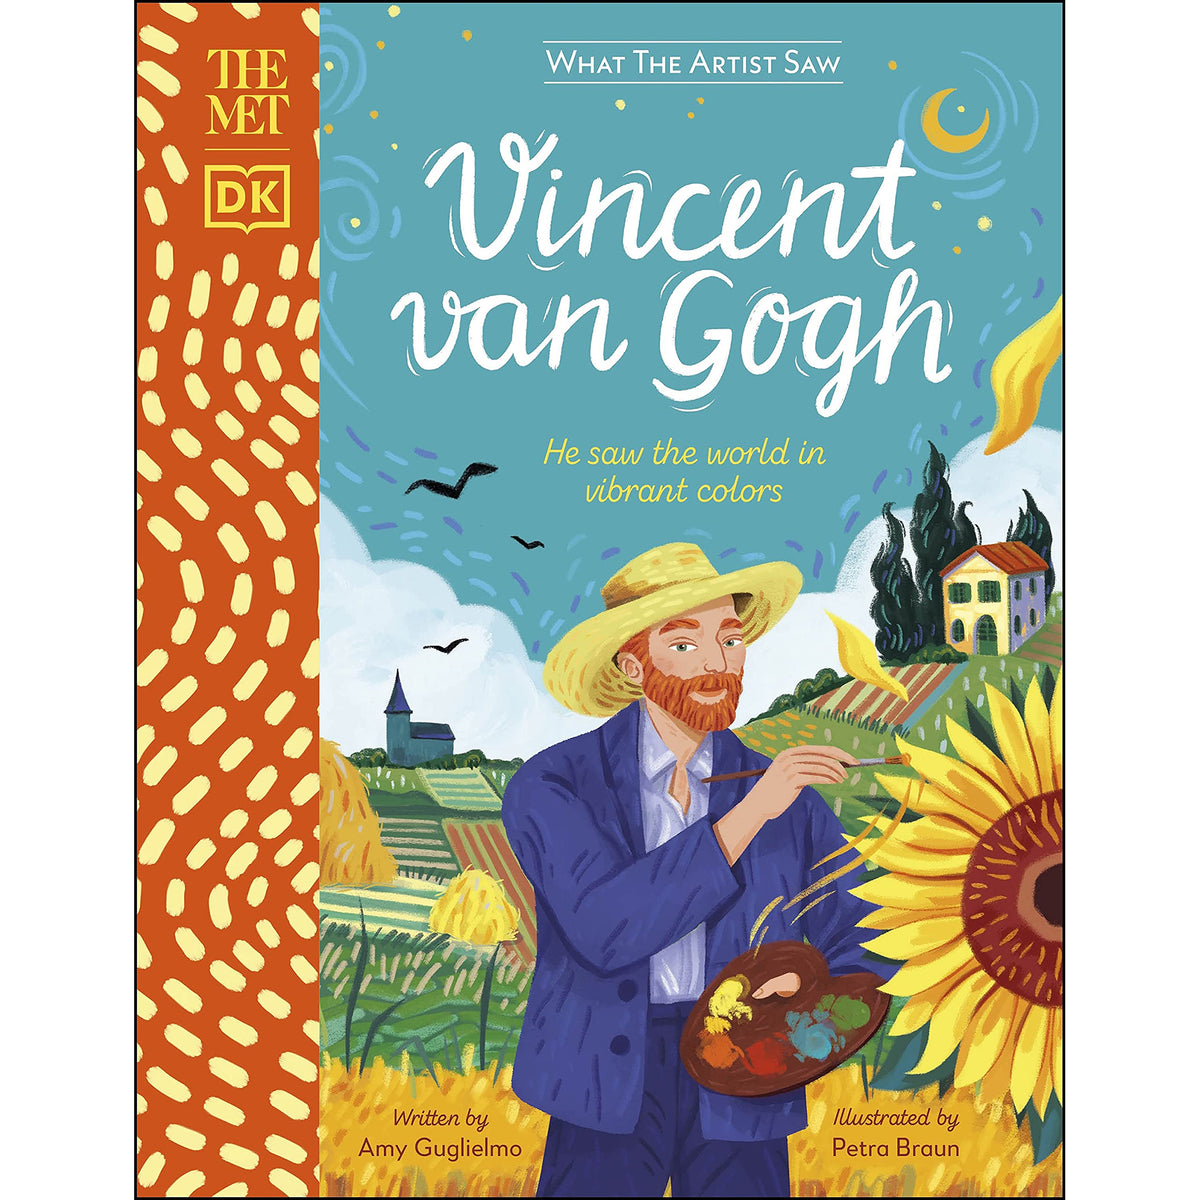 Vincent van Gogh: He saw the world in vibrant colors (The Met What the Artist Saw)